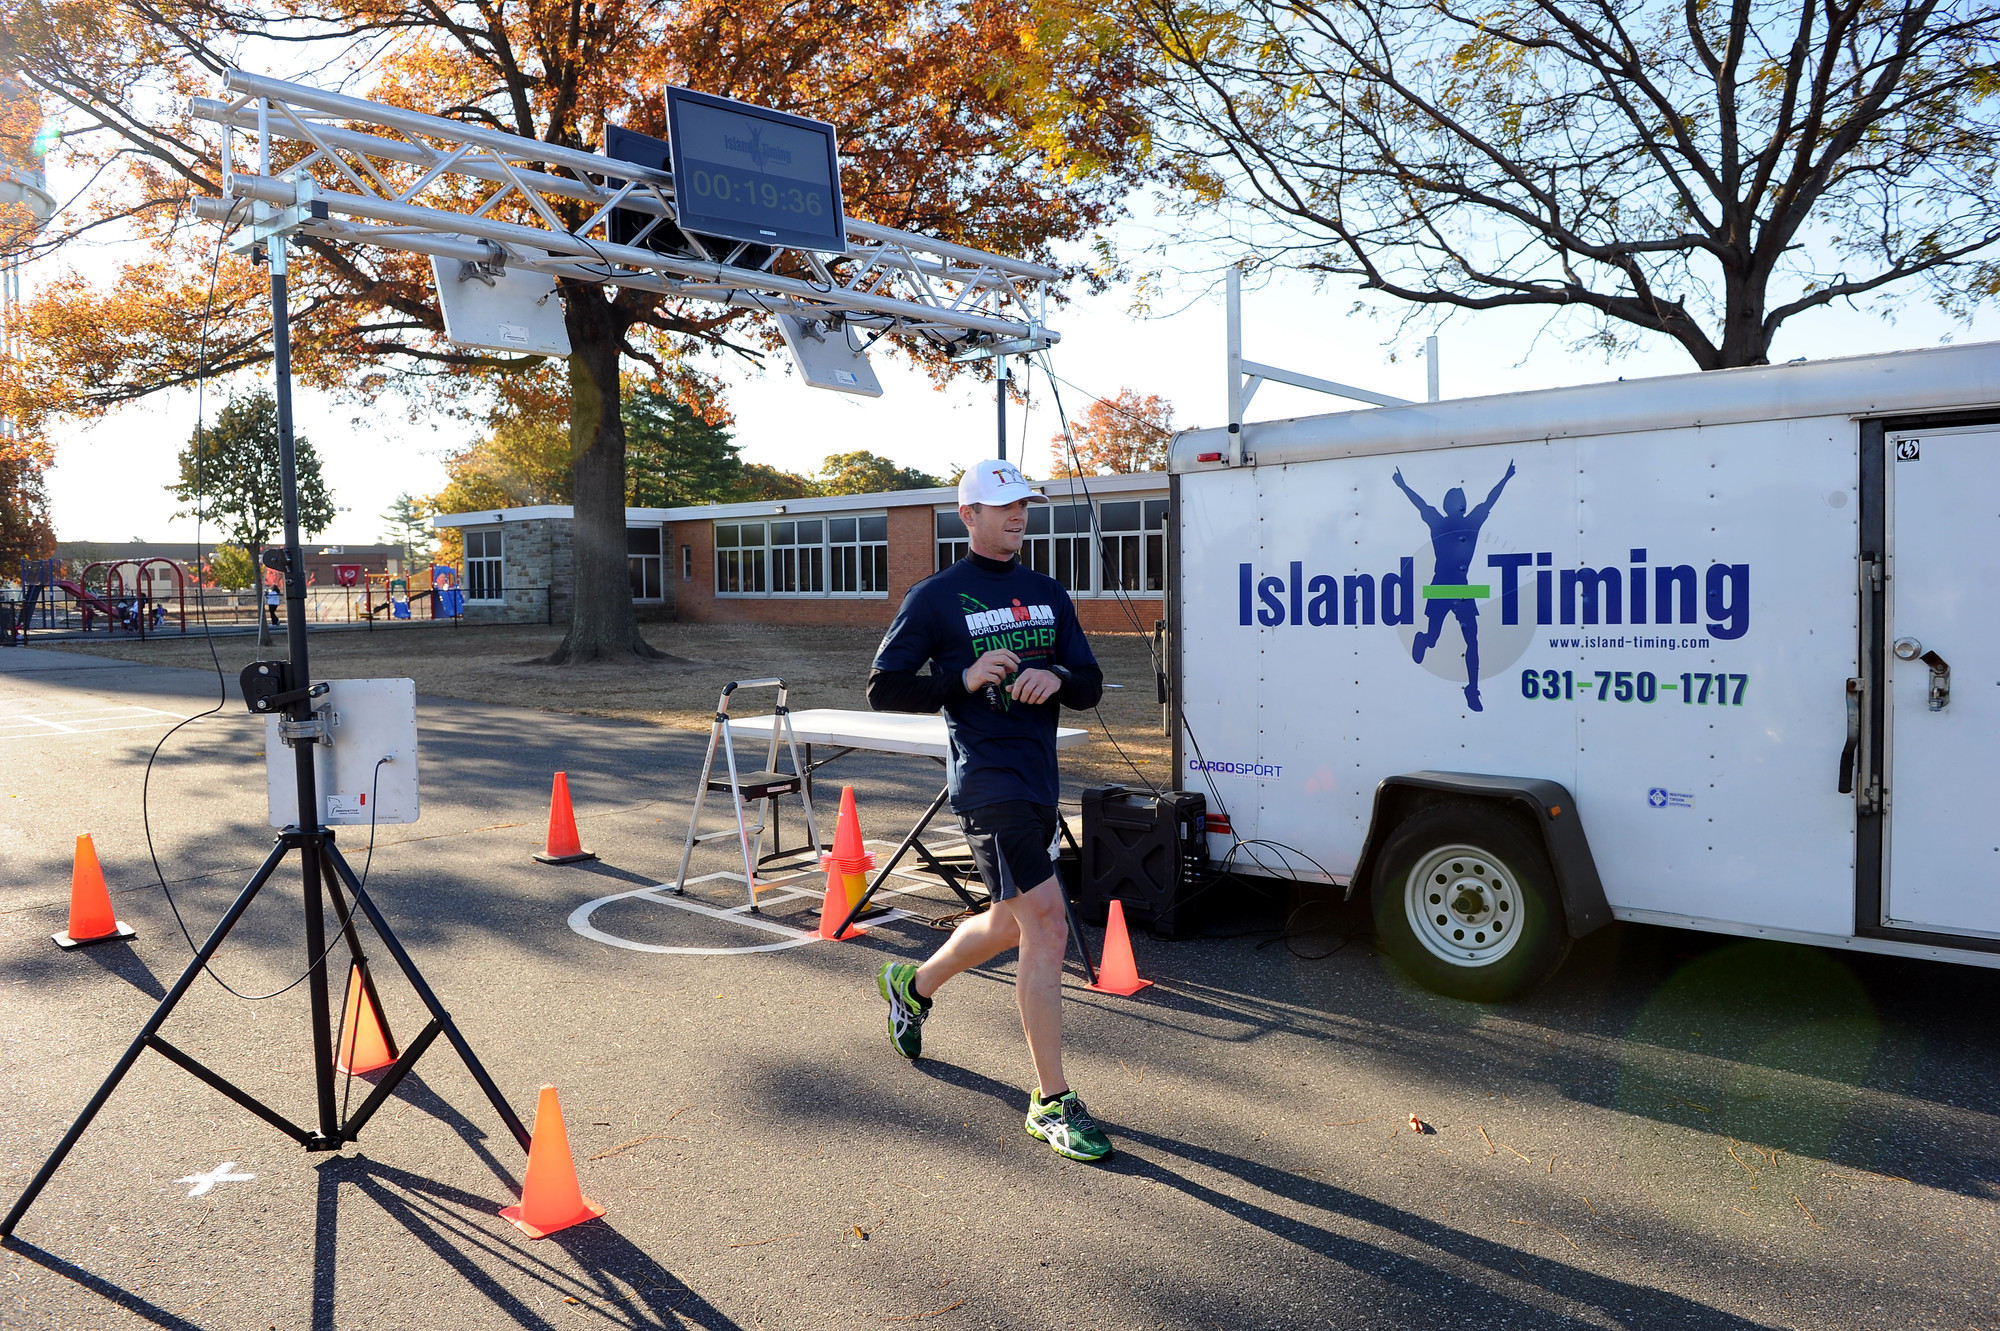 Joe Redmond, 33, of Rockaway Park was first to cross the finish line at 19 minutes, 35 seconds